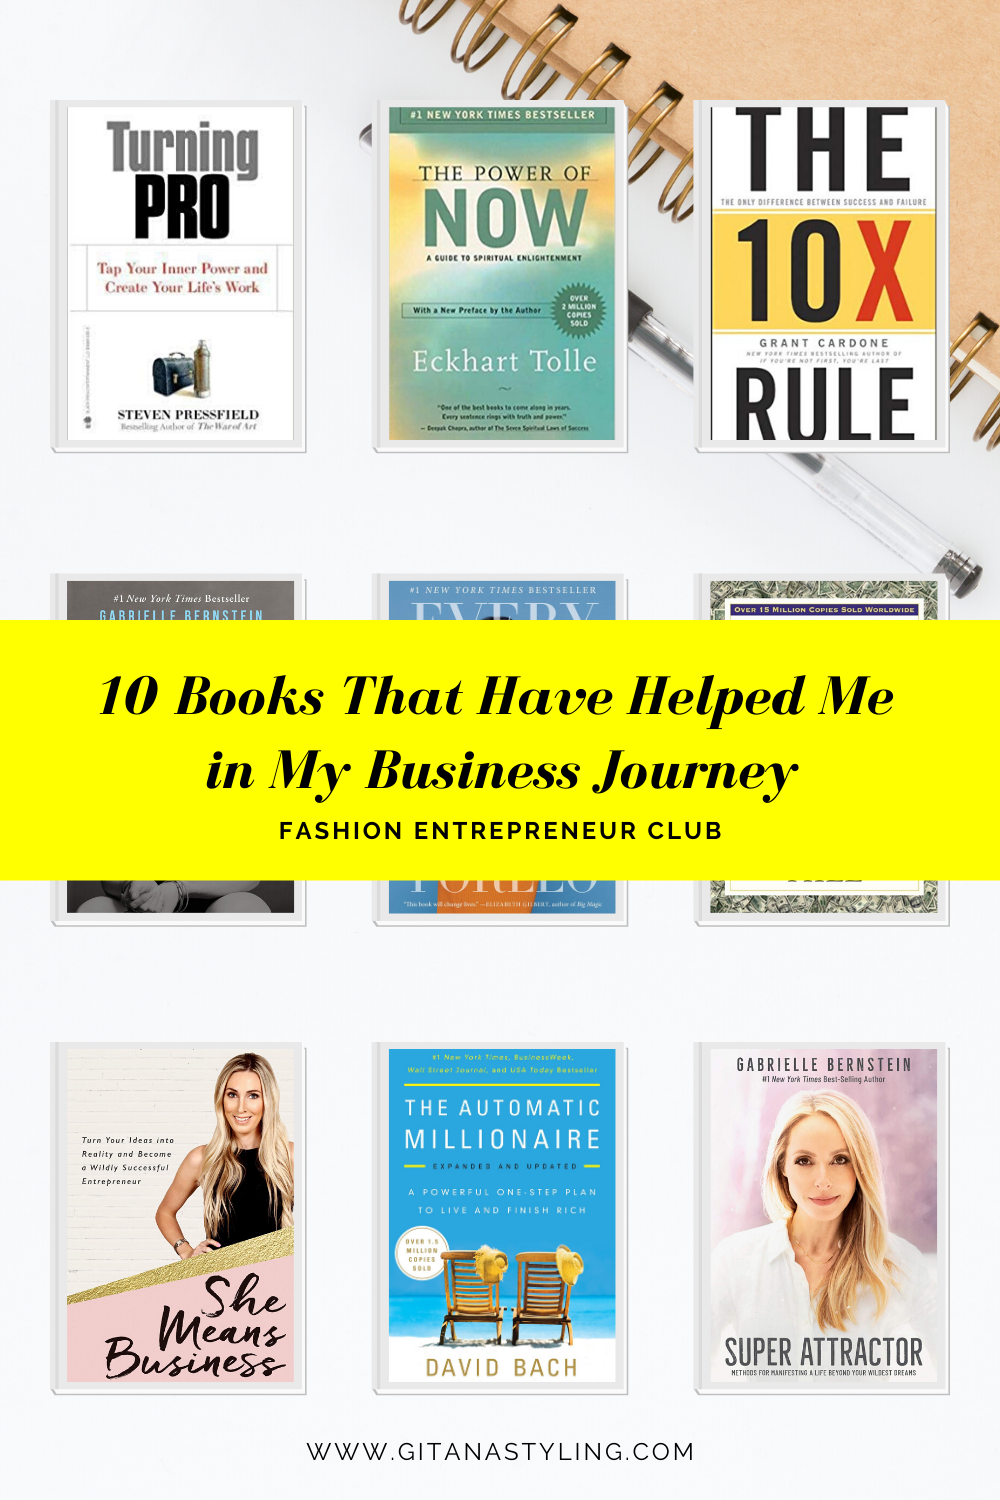 The Books That Have Helped Me in My Business Journey